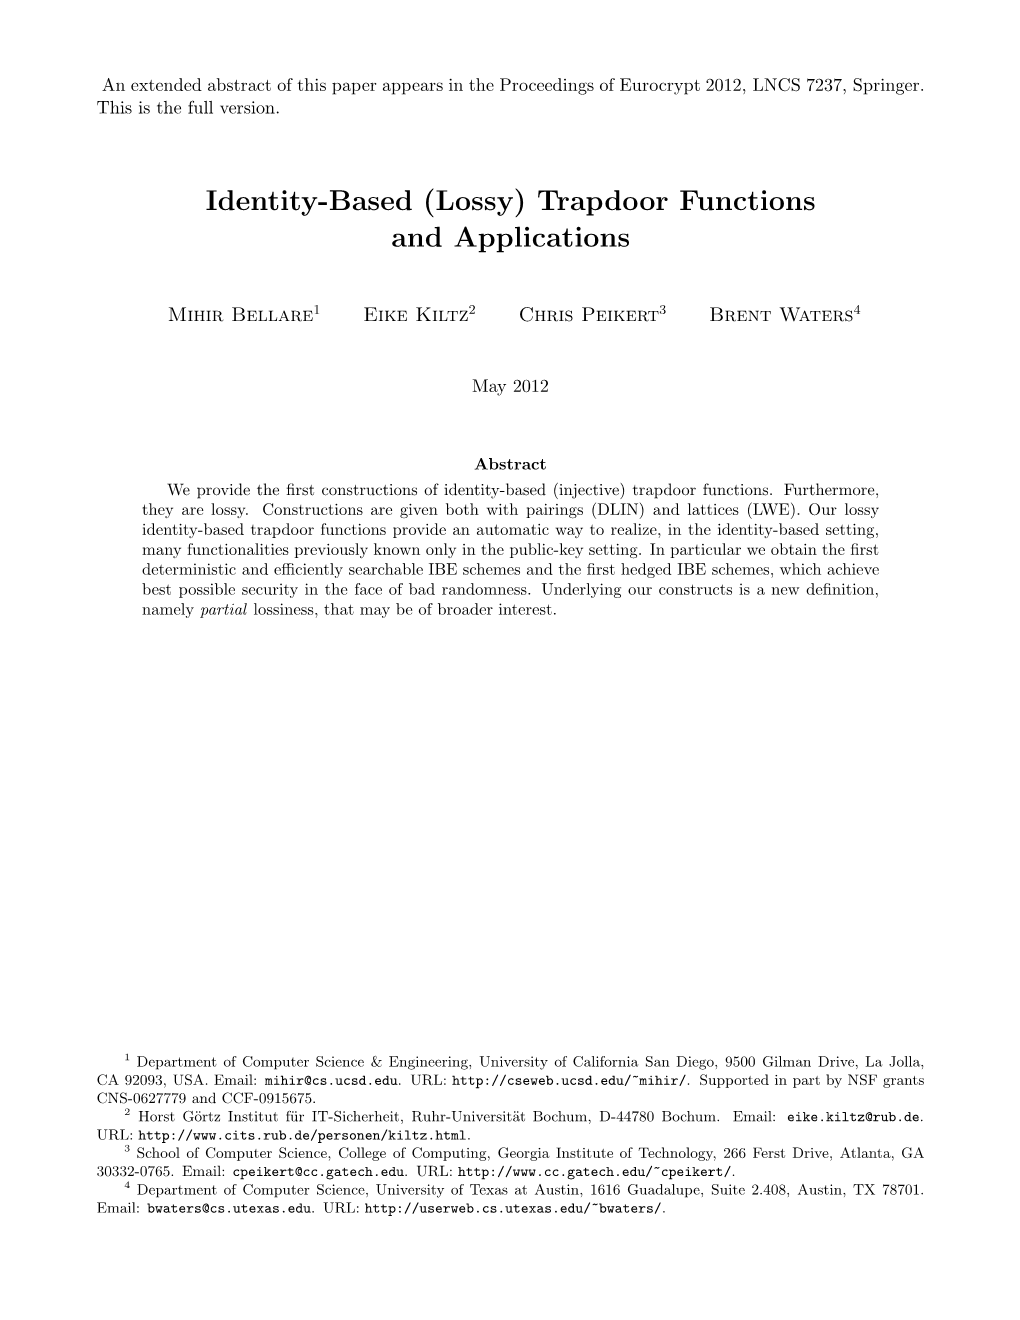 Identity Based (Lossy) Trapdoor Functions and Applications